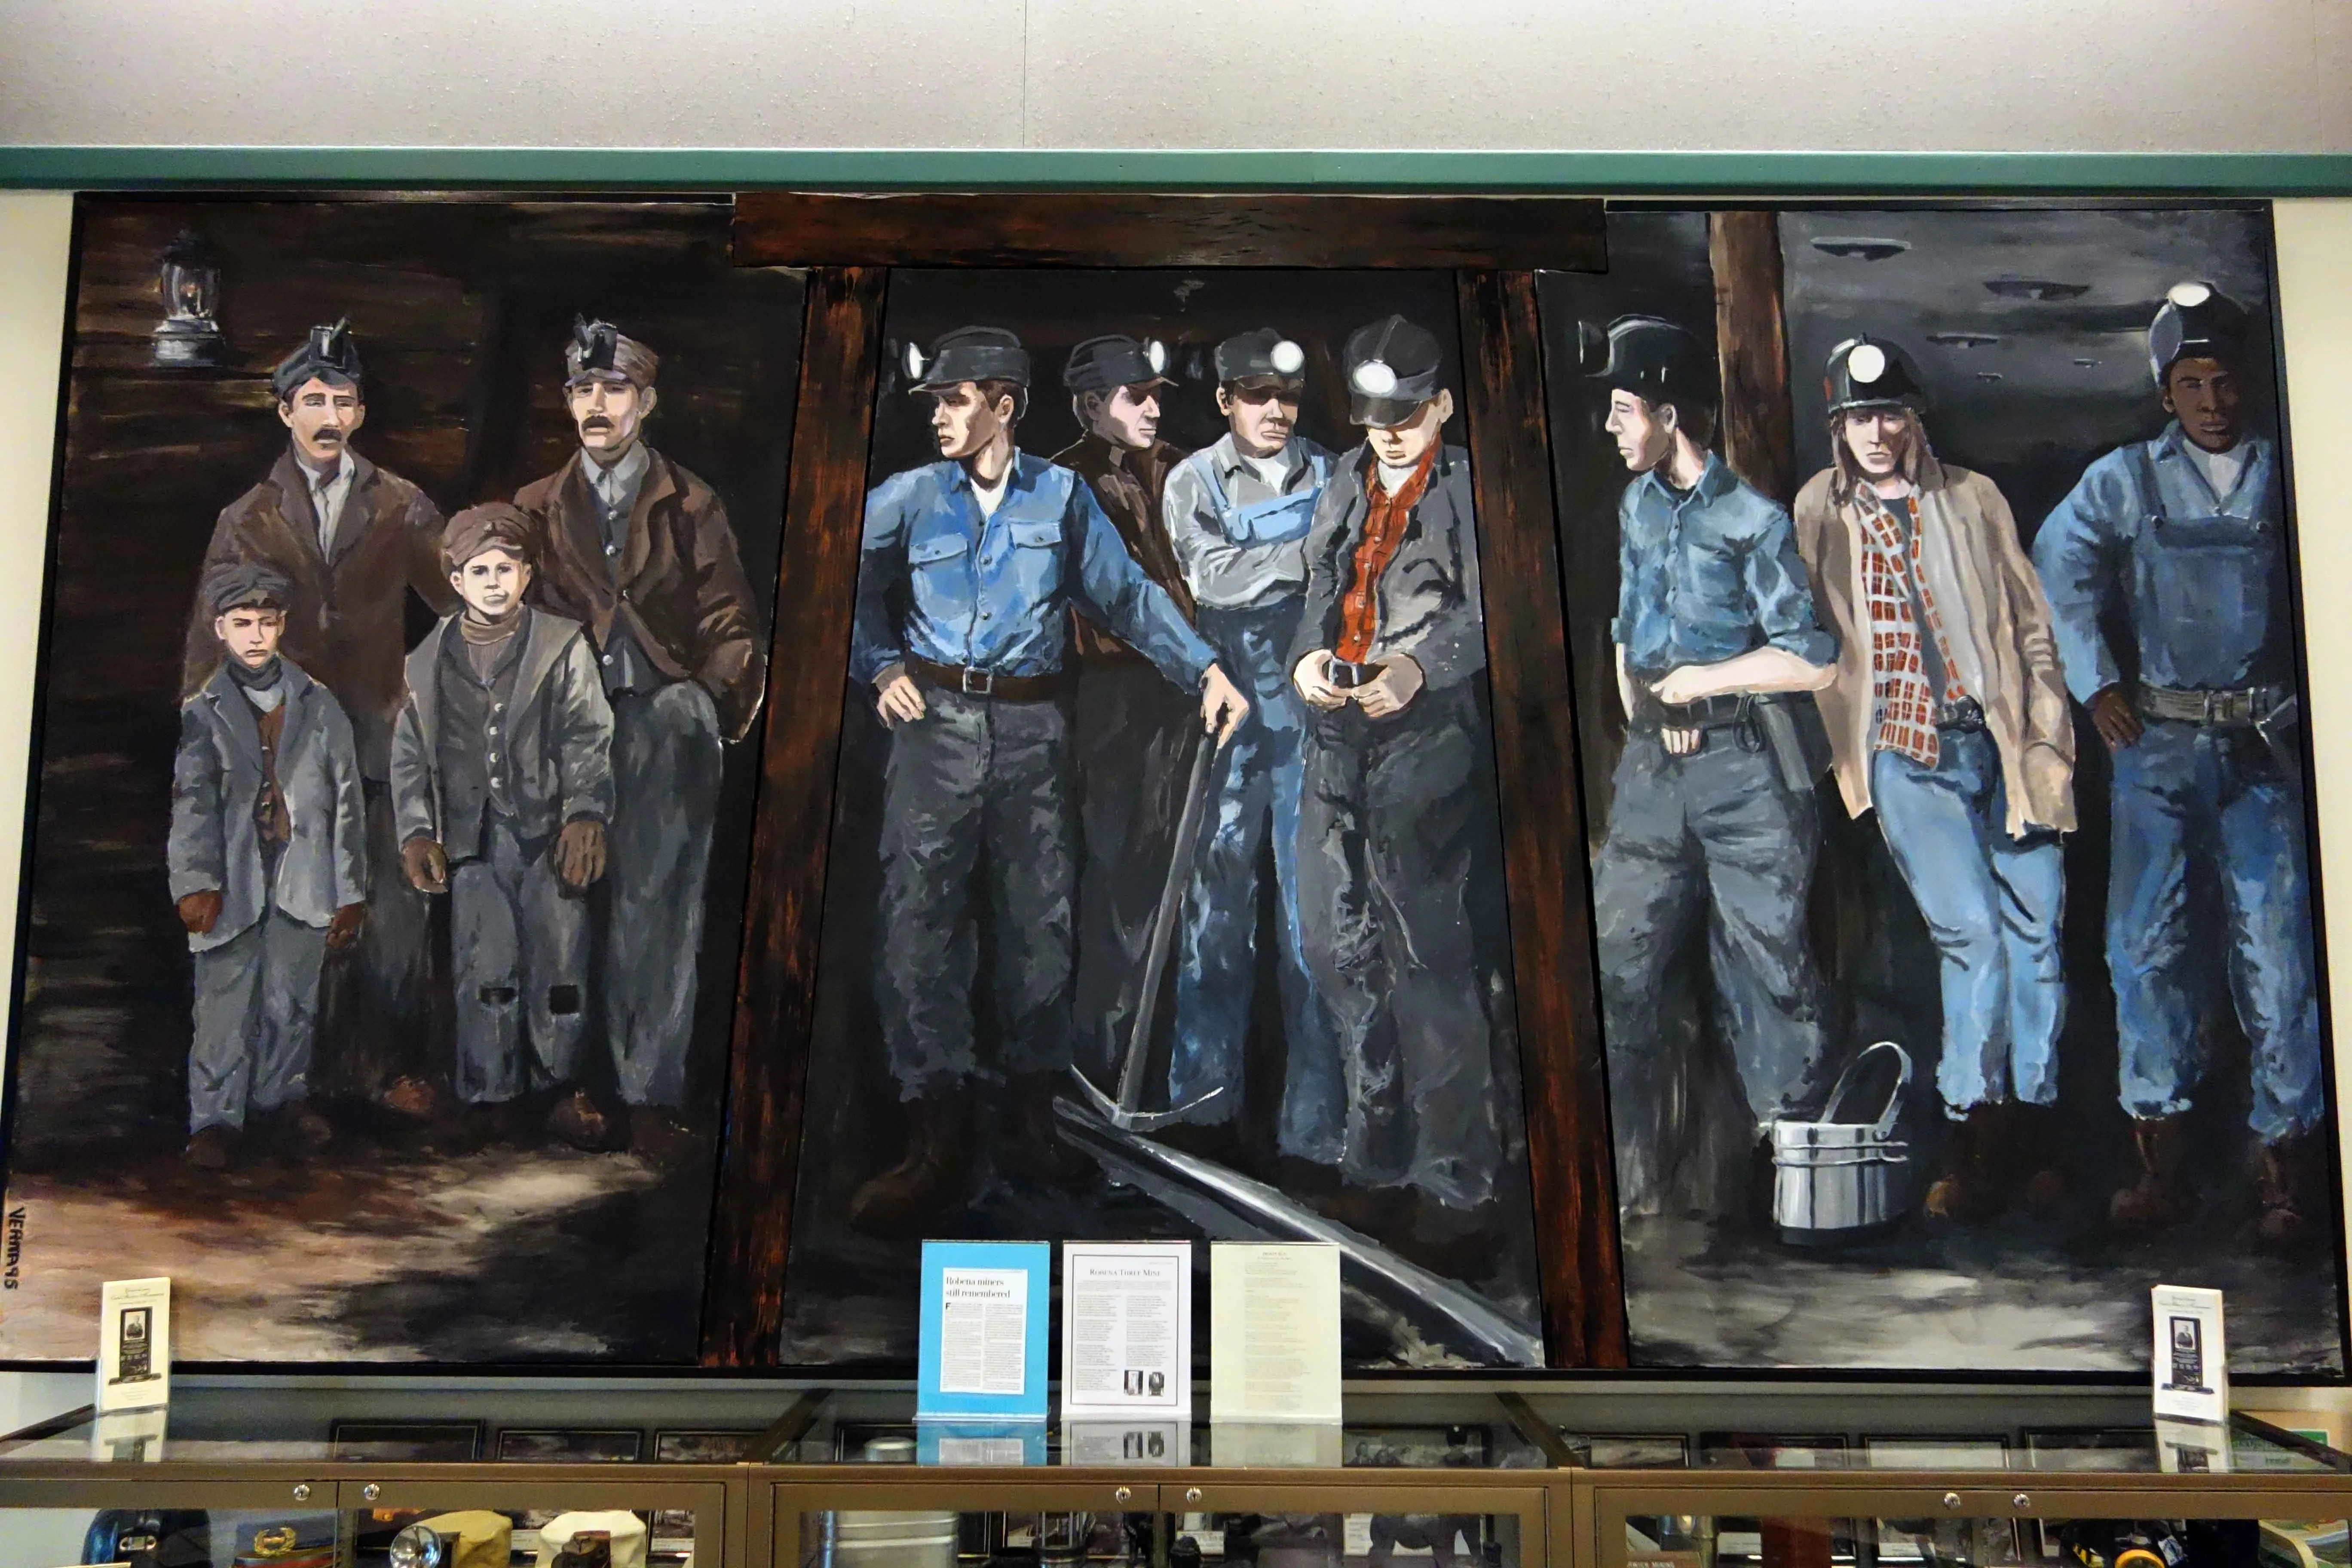 A painting depicts three eras of coal mining. The first appears to be 100 plus years ago, and children are in the mine alongside men. In the era are men with headlamps and pitchforks. In what appears to be the most recent era there are men standing in a mine that appears to be more sturdily built.